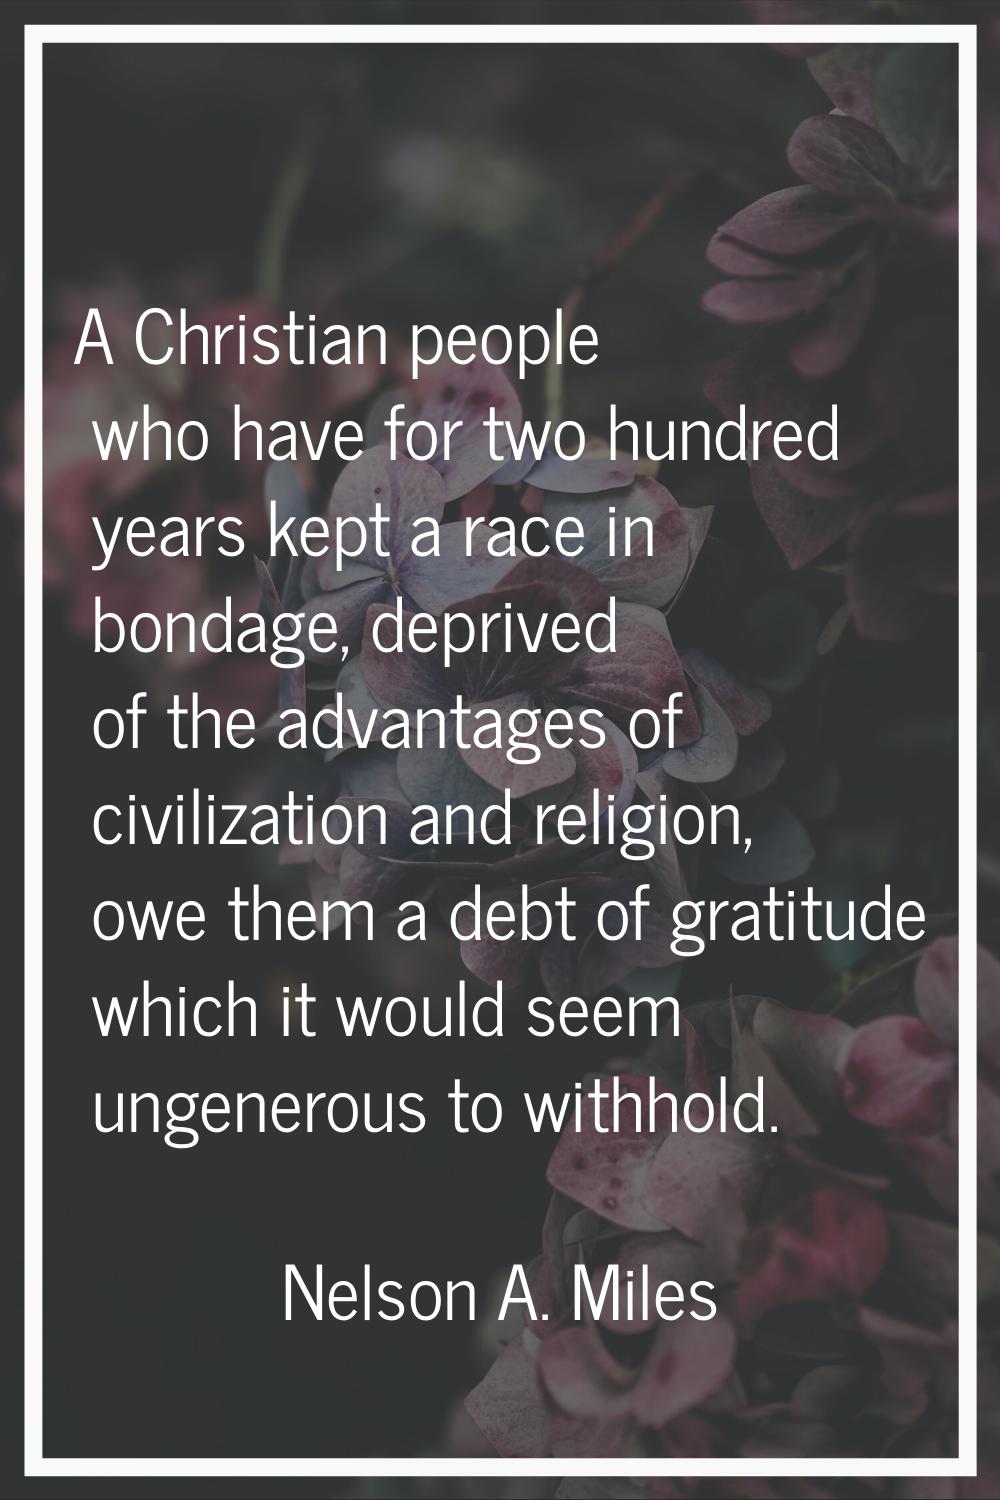 A Christian people who have for two hundred years kept a race in bondage, deprived of the advantage